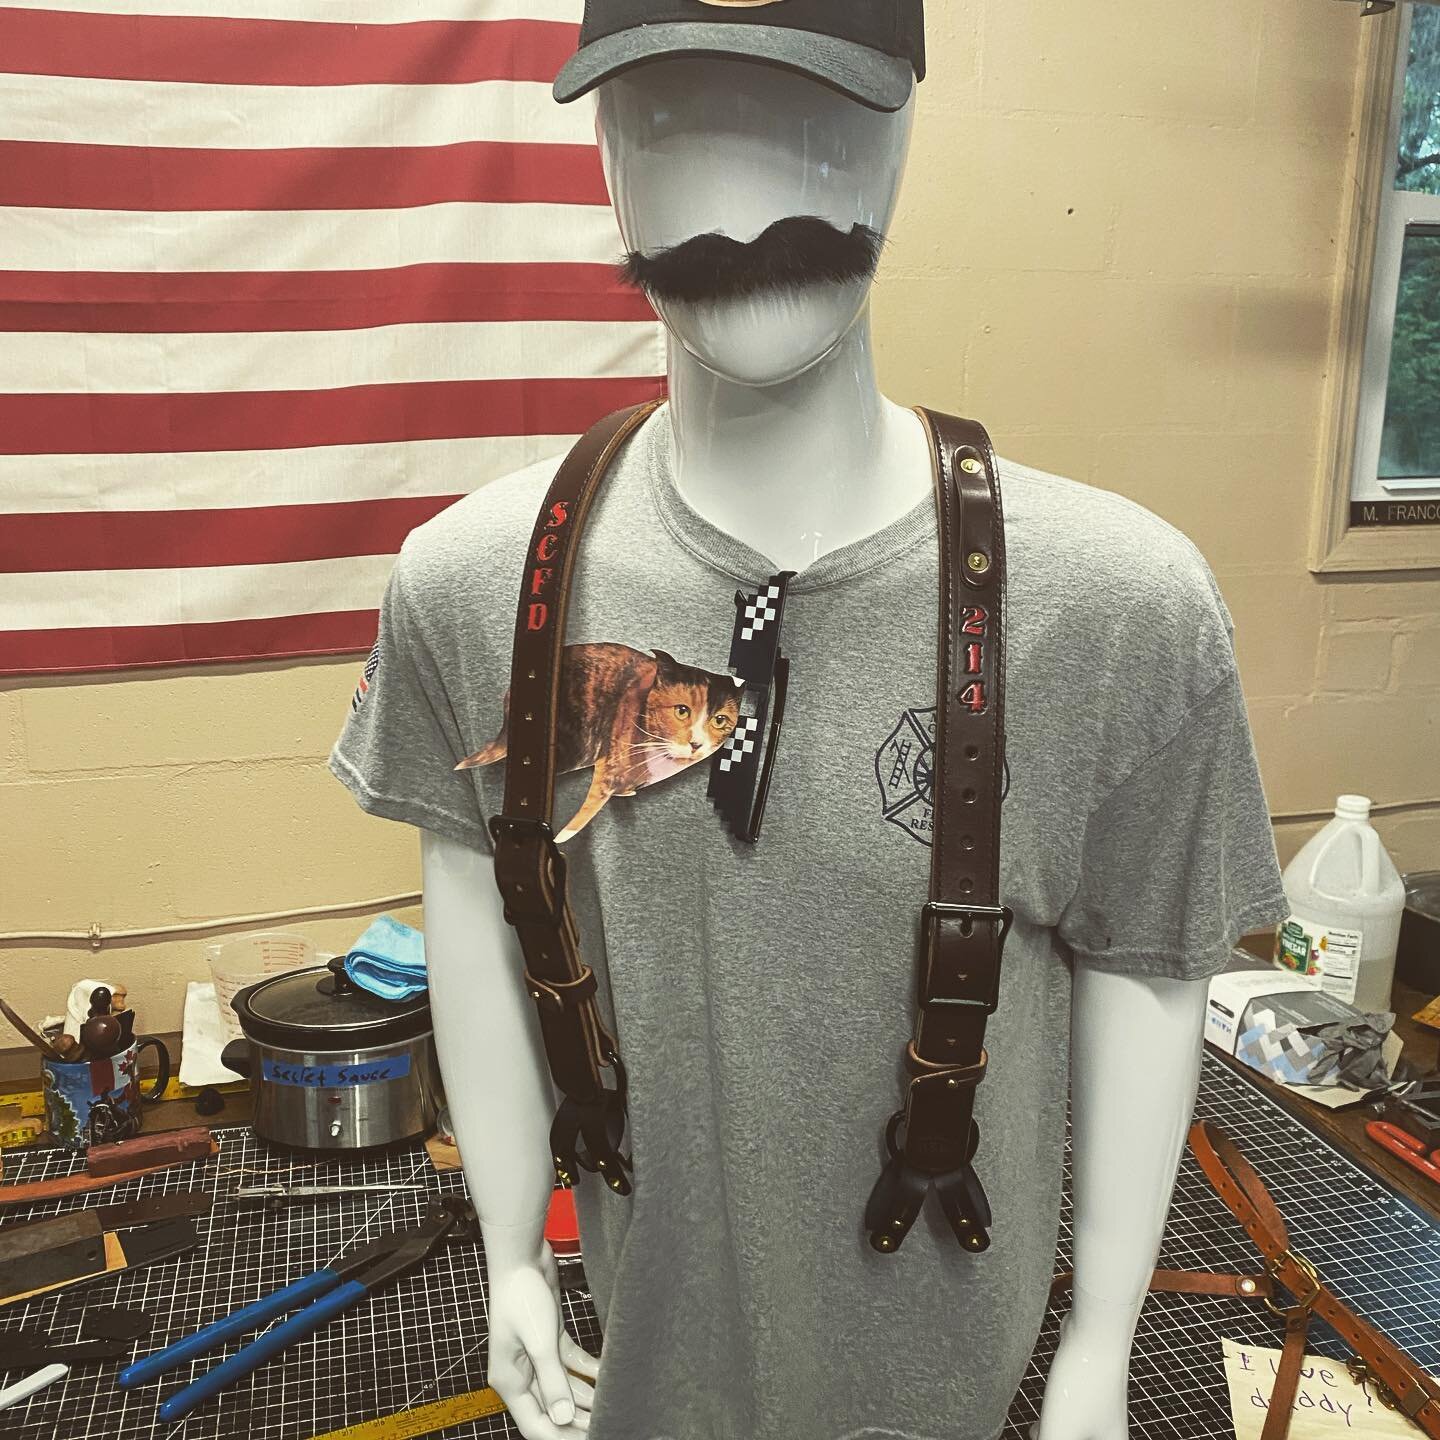 Premium Firefighter Suspenders

These Firefighter Suspenders are hand-crafted using whole grain English Bridle and Natural Veg Tan leather from&nbsp;Hermann Oak. Two pieces are sewn together, only exposing the beautiful grain on both sides of the str